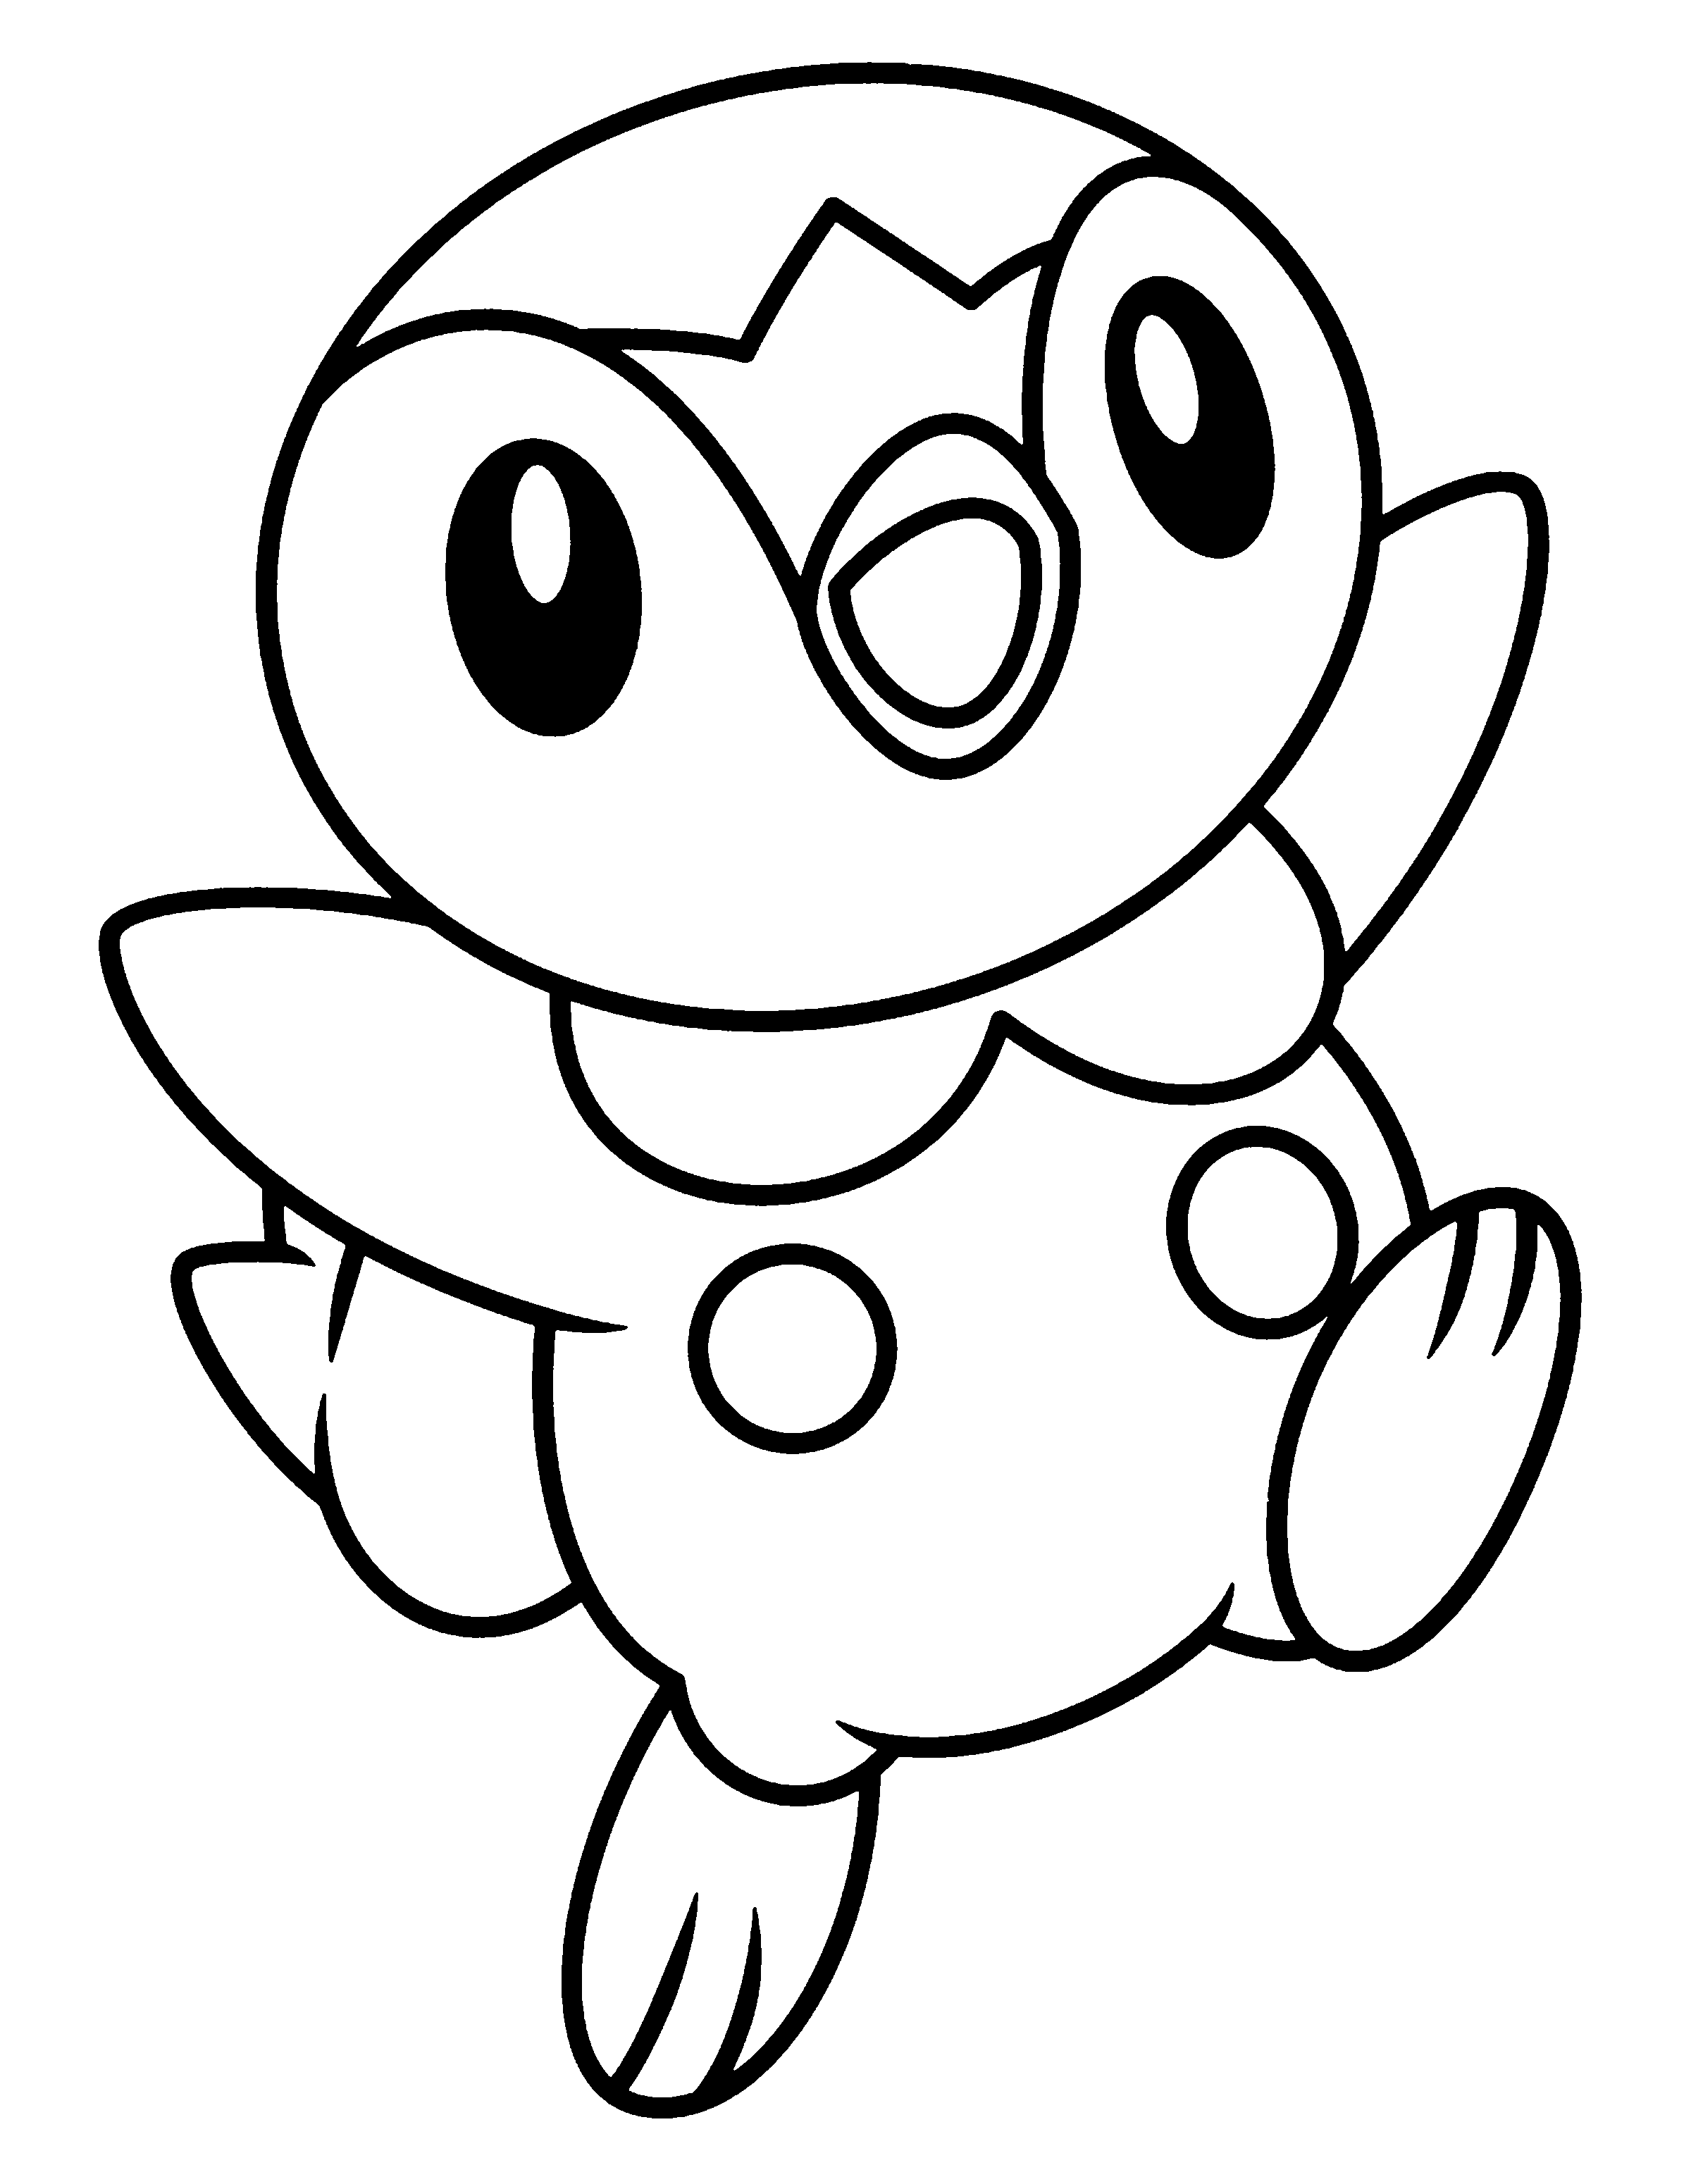 Squirtle coloring pages to download and print for free